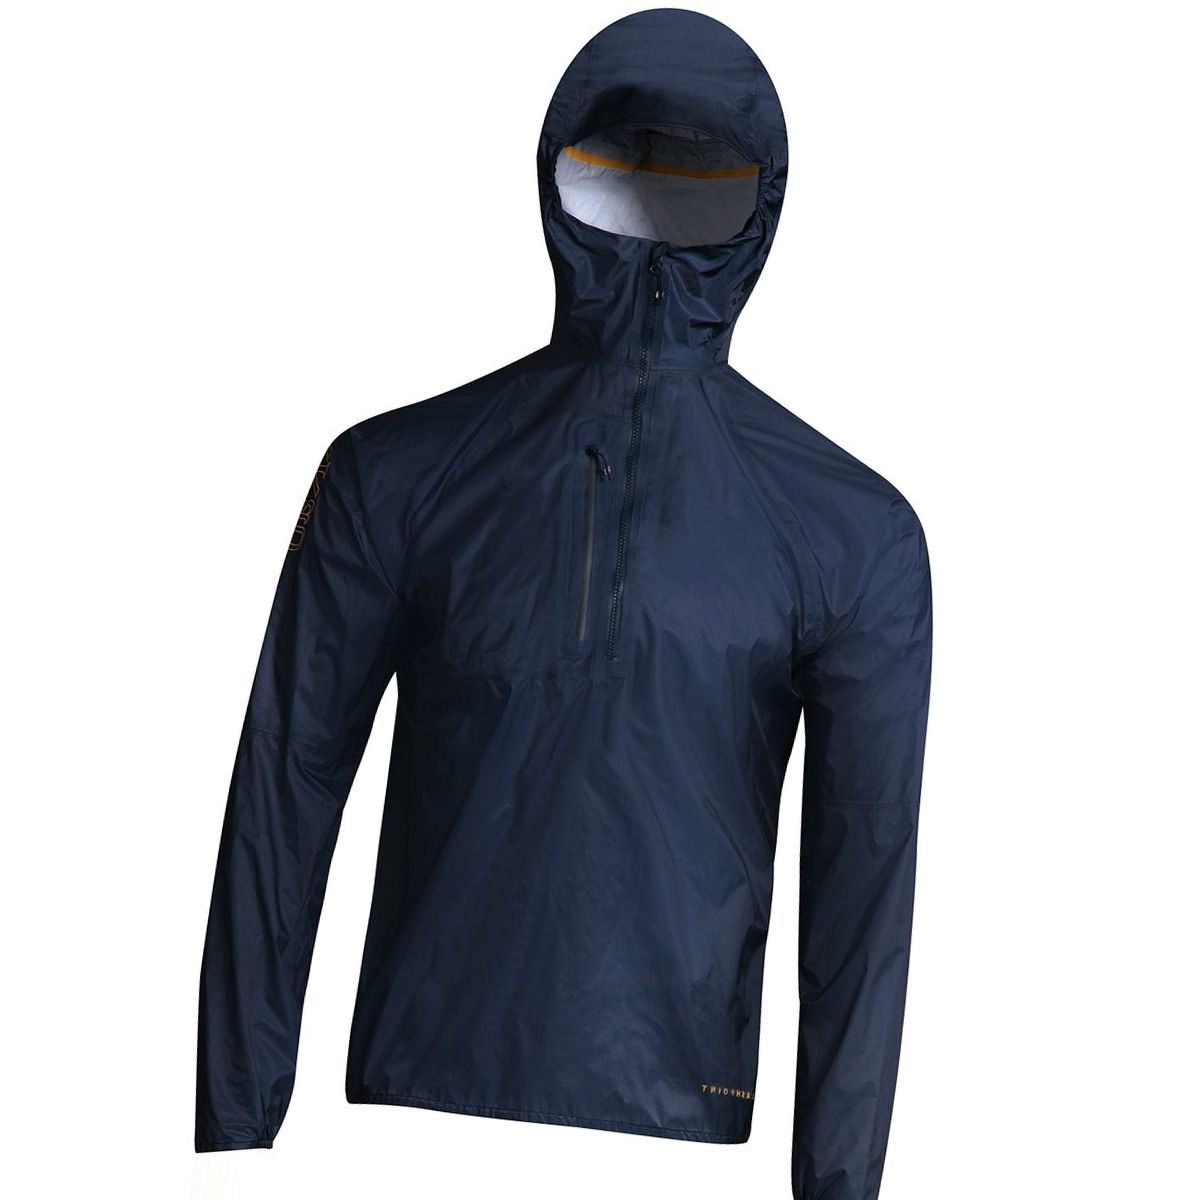 Rab Flashpoint Pull-On Jacket - Men's